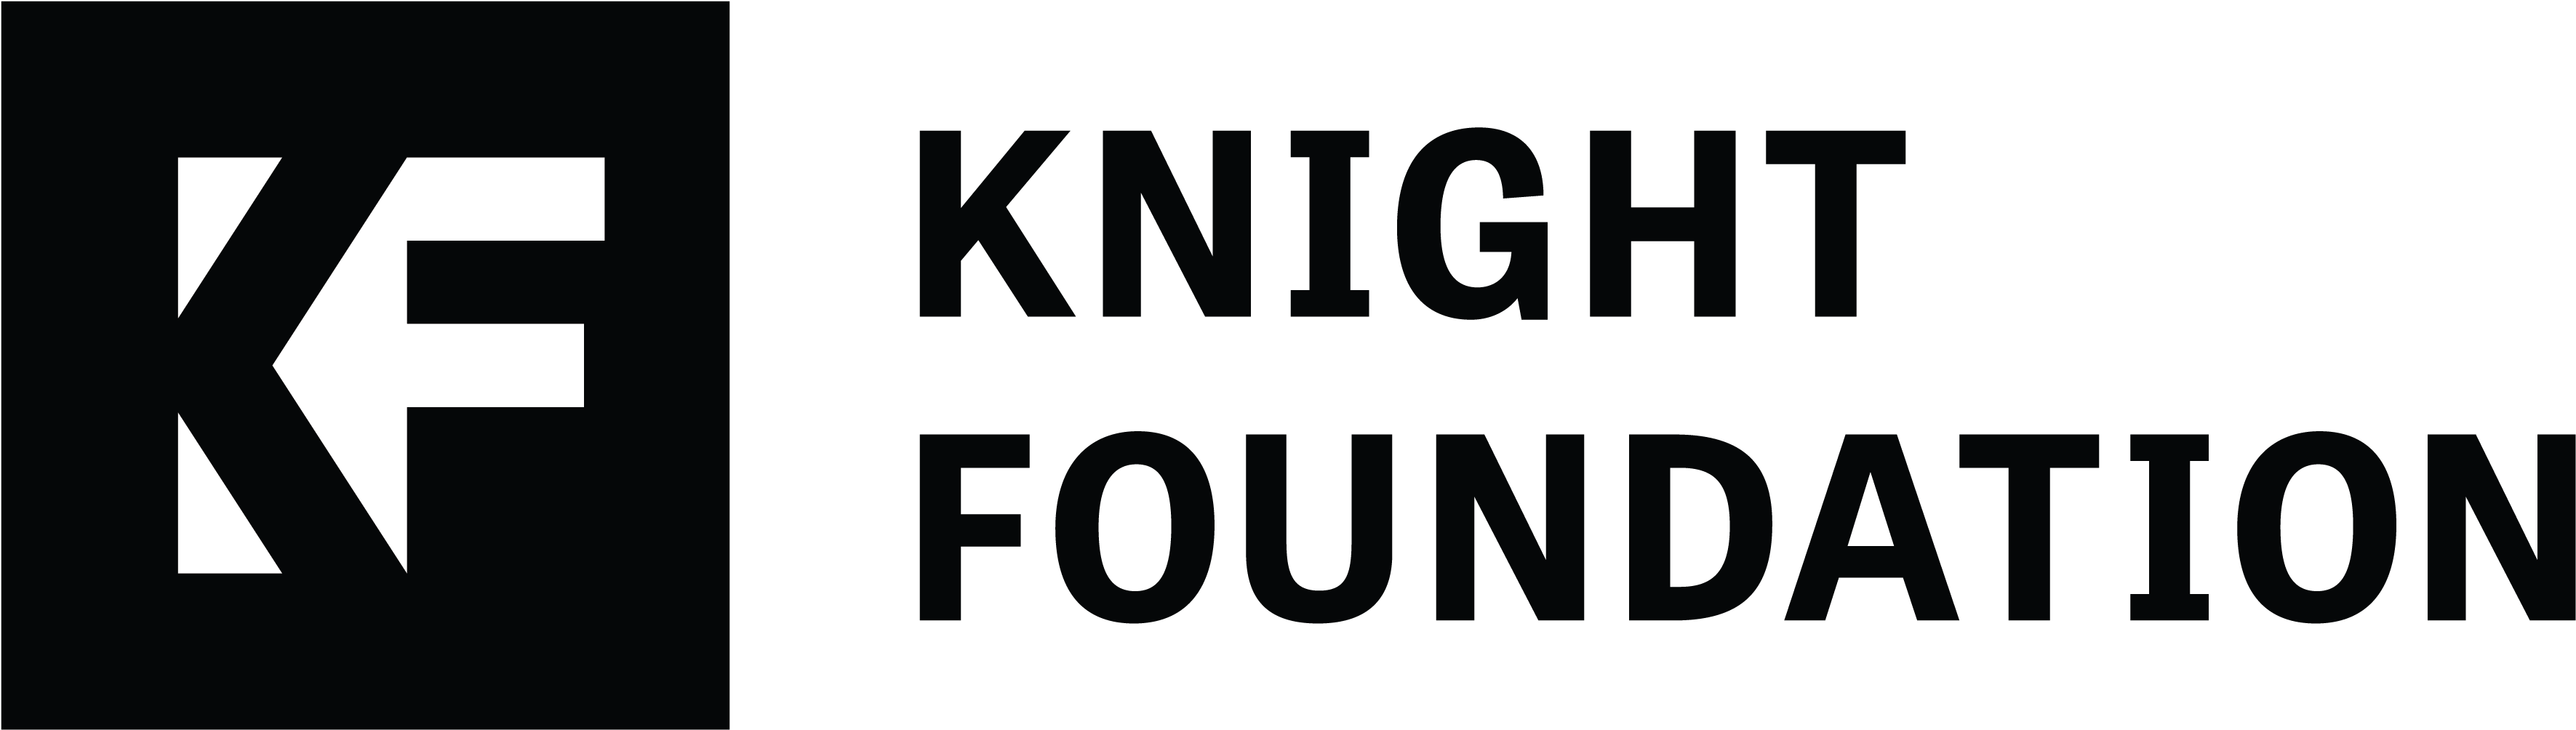 The Primary Version Knight Foundation Logo Is The Horizontal - James L Knight Foundation (3784x1226)